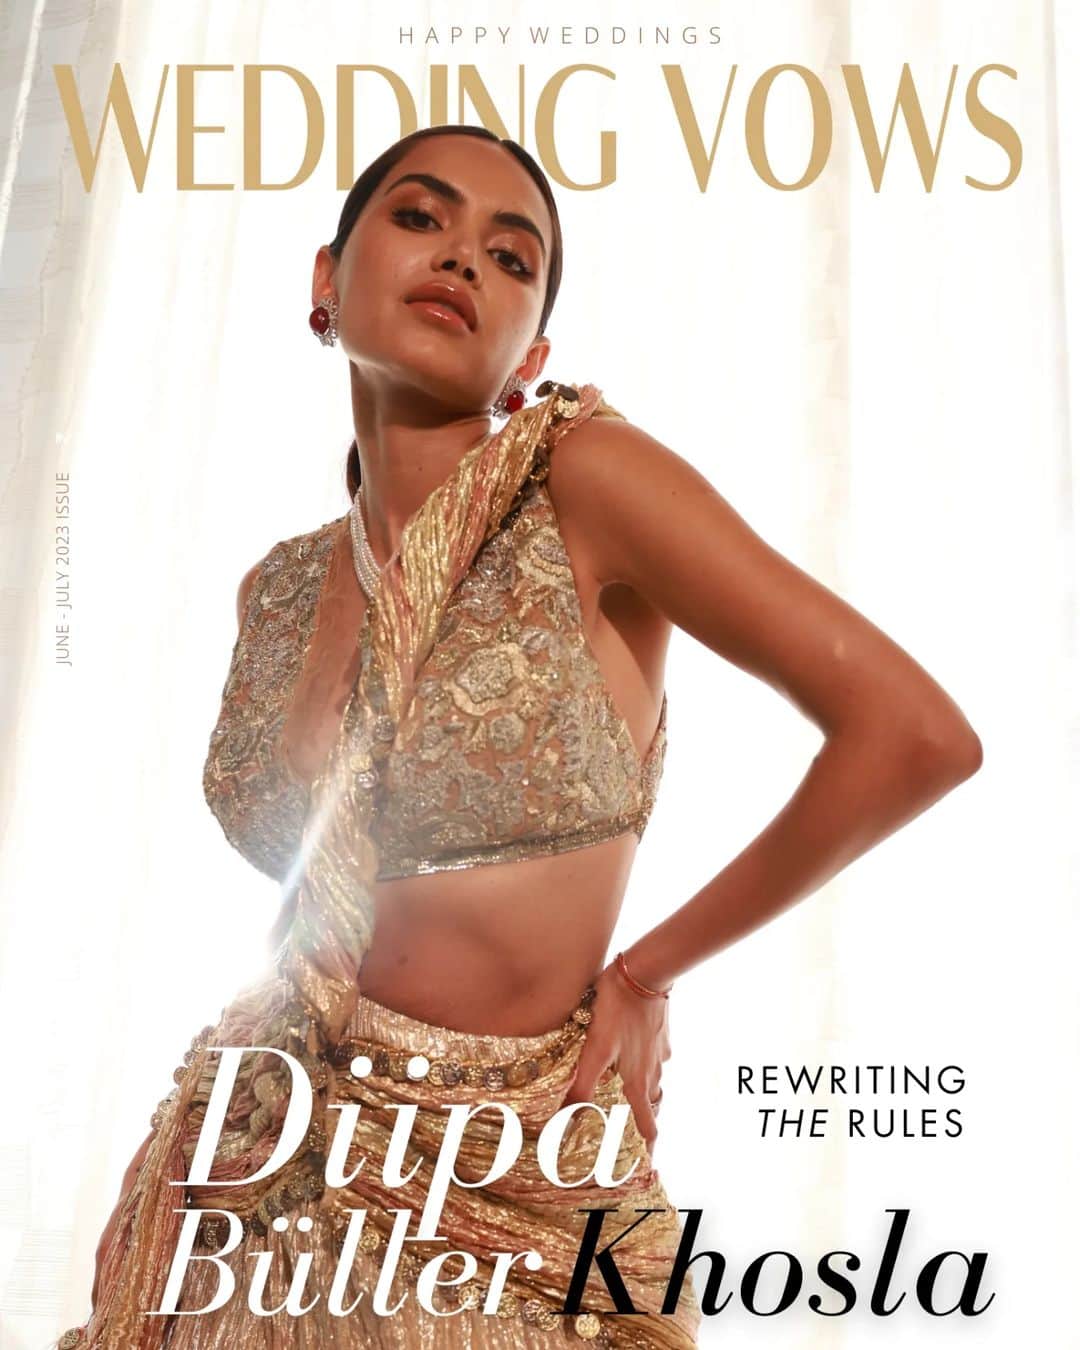 Diipa Büller-Khoslaのインスタグラム：「Fresh off the success of her nationwide champi tour in support of @indewild, we present the dynamic entrepreneur-influencer @diipakhosla as our June cover story.  A much admired personality within the South Asian diaspora of the world,  Diipa has made great strides not only in the  world of content, beauty and fashion but also in the realm of philanthropy and business. This new age digital celebrity and youth icon uses her global influence to create arresting stories of impact by championing female empowerment, community building, inclusivity and diversity, having successfully overcome the obstacles of racism and gender bias that she faced during her initial years in the business.  Magazine : @weddingvows.in Publisher & CEO: @itsme_daksh Creative Head and Styling: @sshorewala Team WV: @farvi_wadhwa Wardrobe: @etashabyashajain Jewellery: @maiiarabymn Accessories: @eena.official Photography: @ishanzaka Hair Makeup: @ankitamanwanimakeupandhair Videography: @vickyshinde_ Location: @surajestate @the_publicist_co Artist's Publicity : @dreamnhustlemedia  #weddingvows #weddingvowsmagazine #diipakhosla #diipabullerkhosla #influencer #fashionblogger #Cover #coverstar #celebritycover #indiewild #beauty #skincare #selfcare」